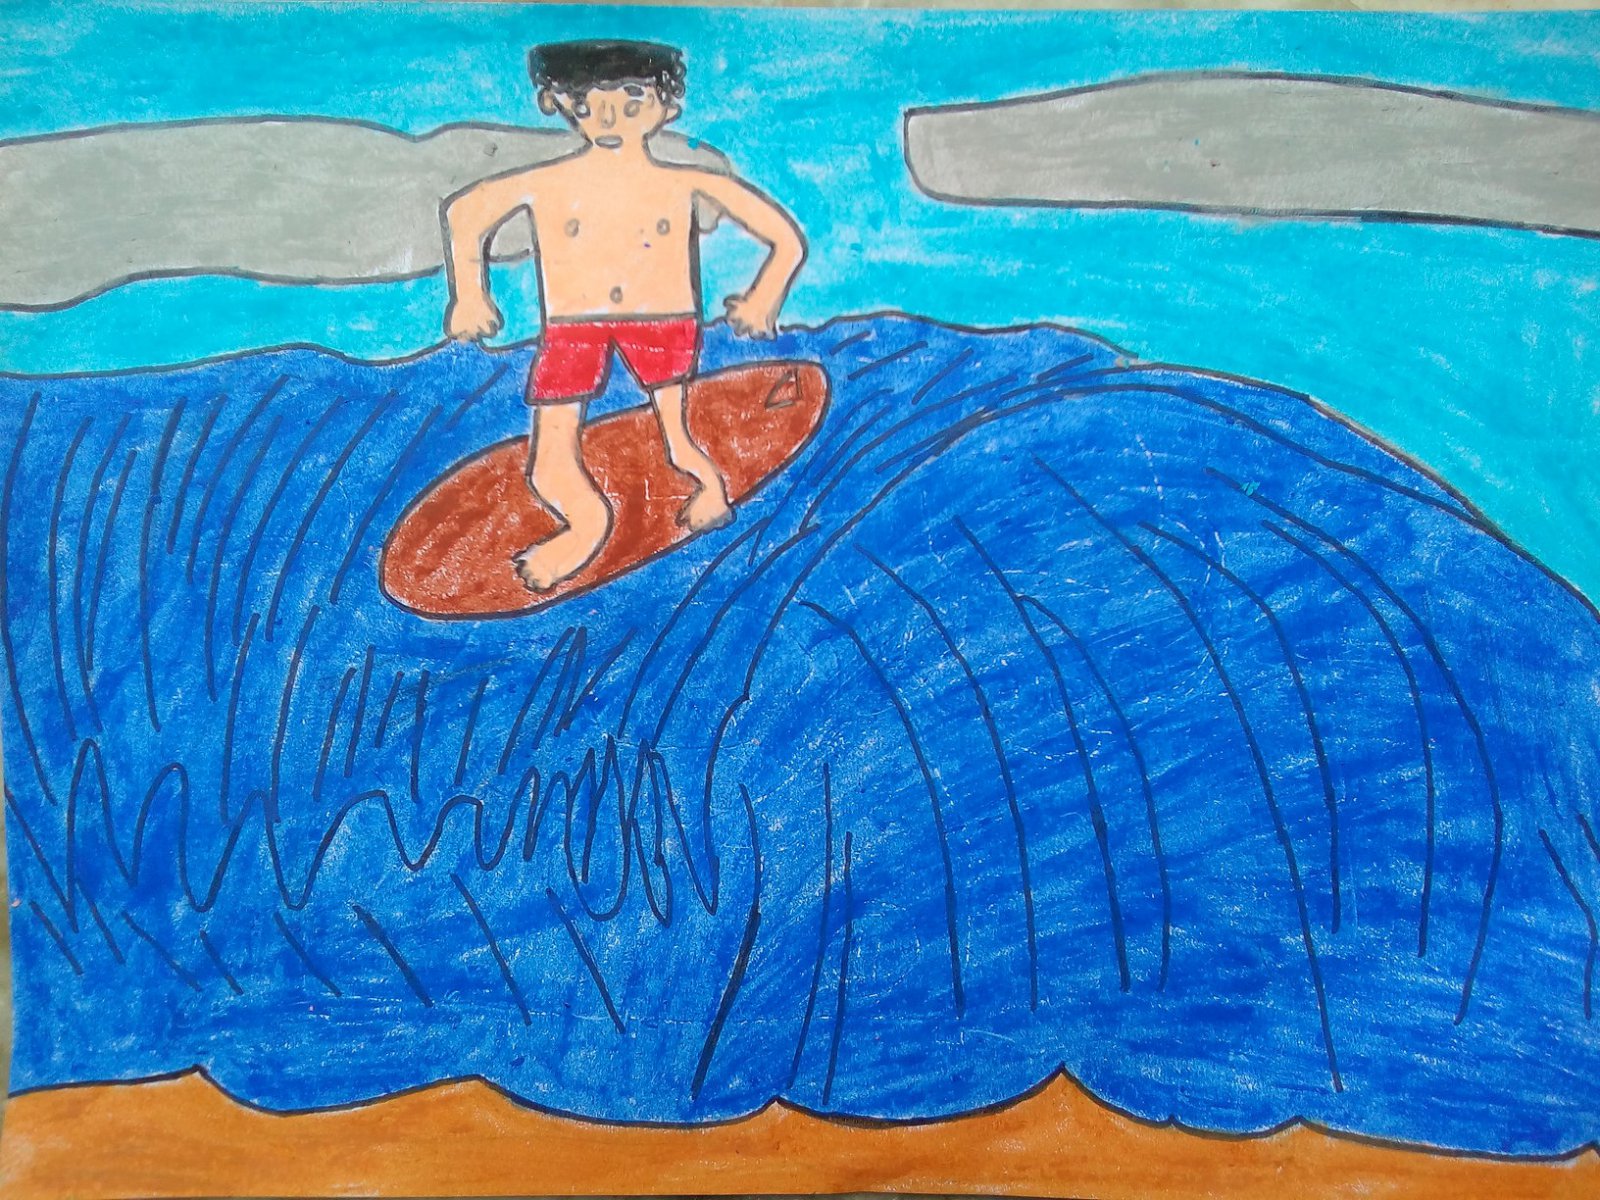 SURFING ( THE SPORT OF RIDING A WAVE TOWARDS THE SHORE WHILE STANDING ON A SURF BOARD). - JOHN ( JOHN ART Gallery 2019).